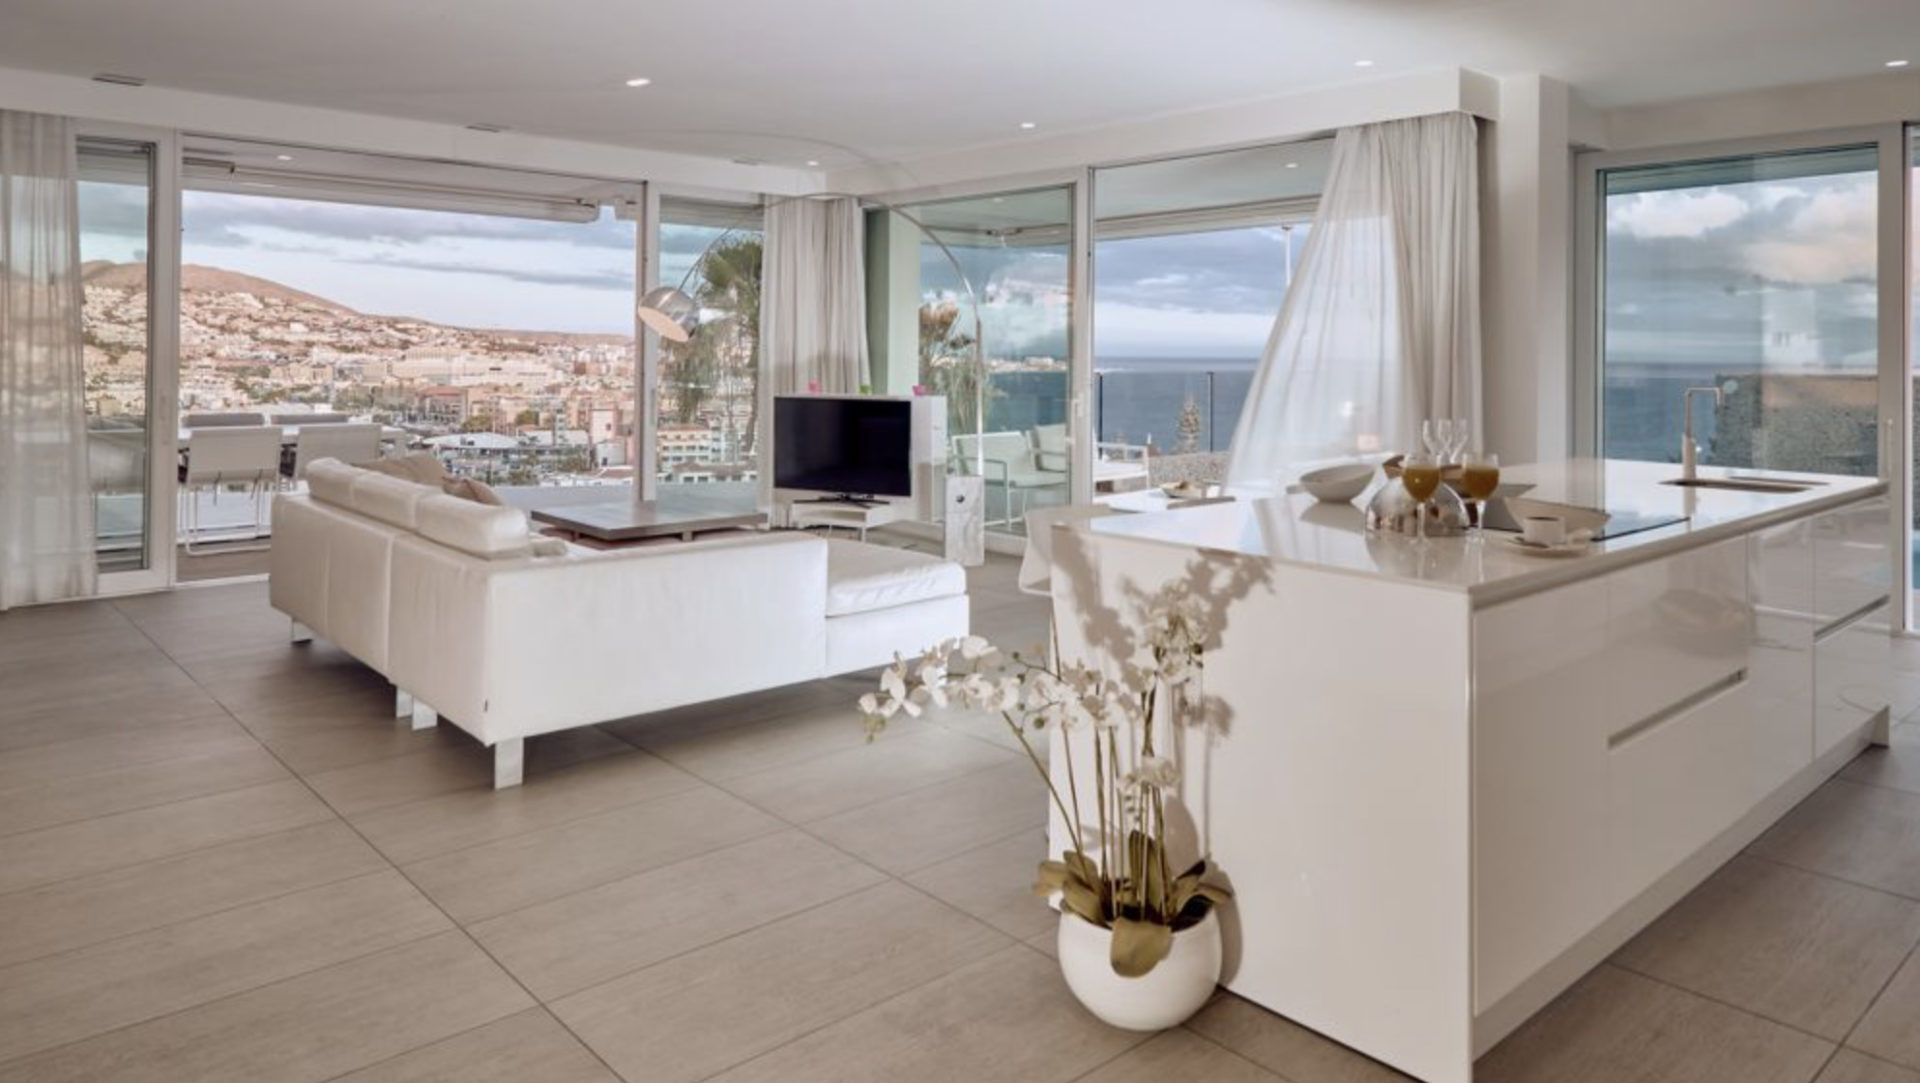 LUXURIA LIFESTYLE WELCOMES BAOBAB SUITES IN TENERIFE